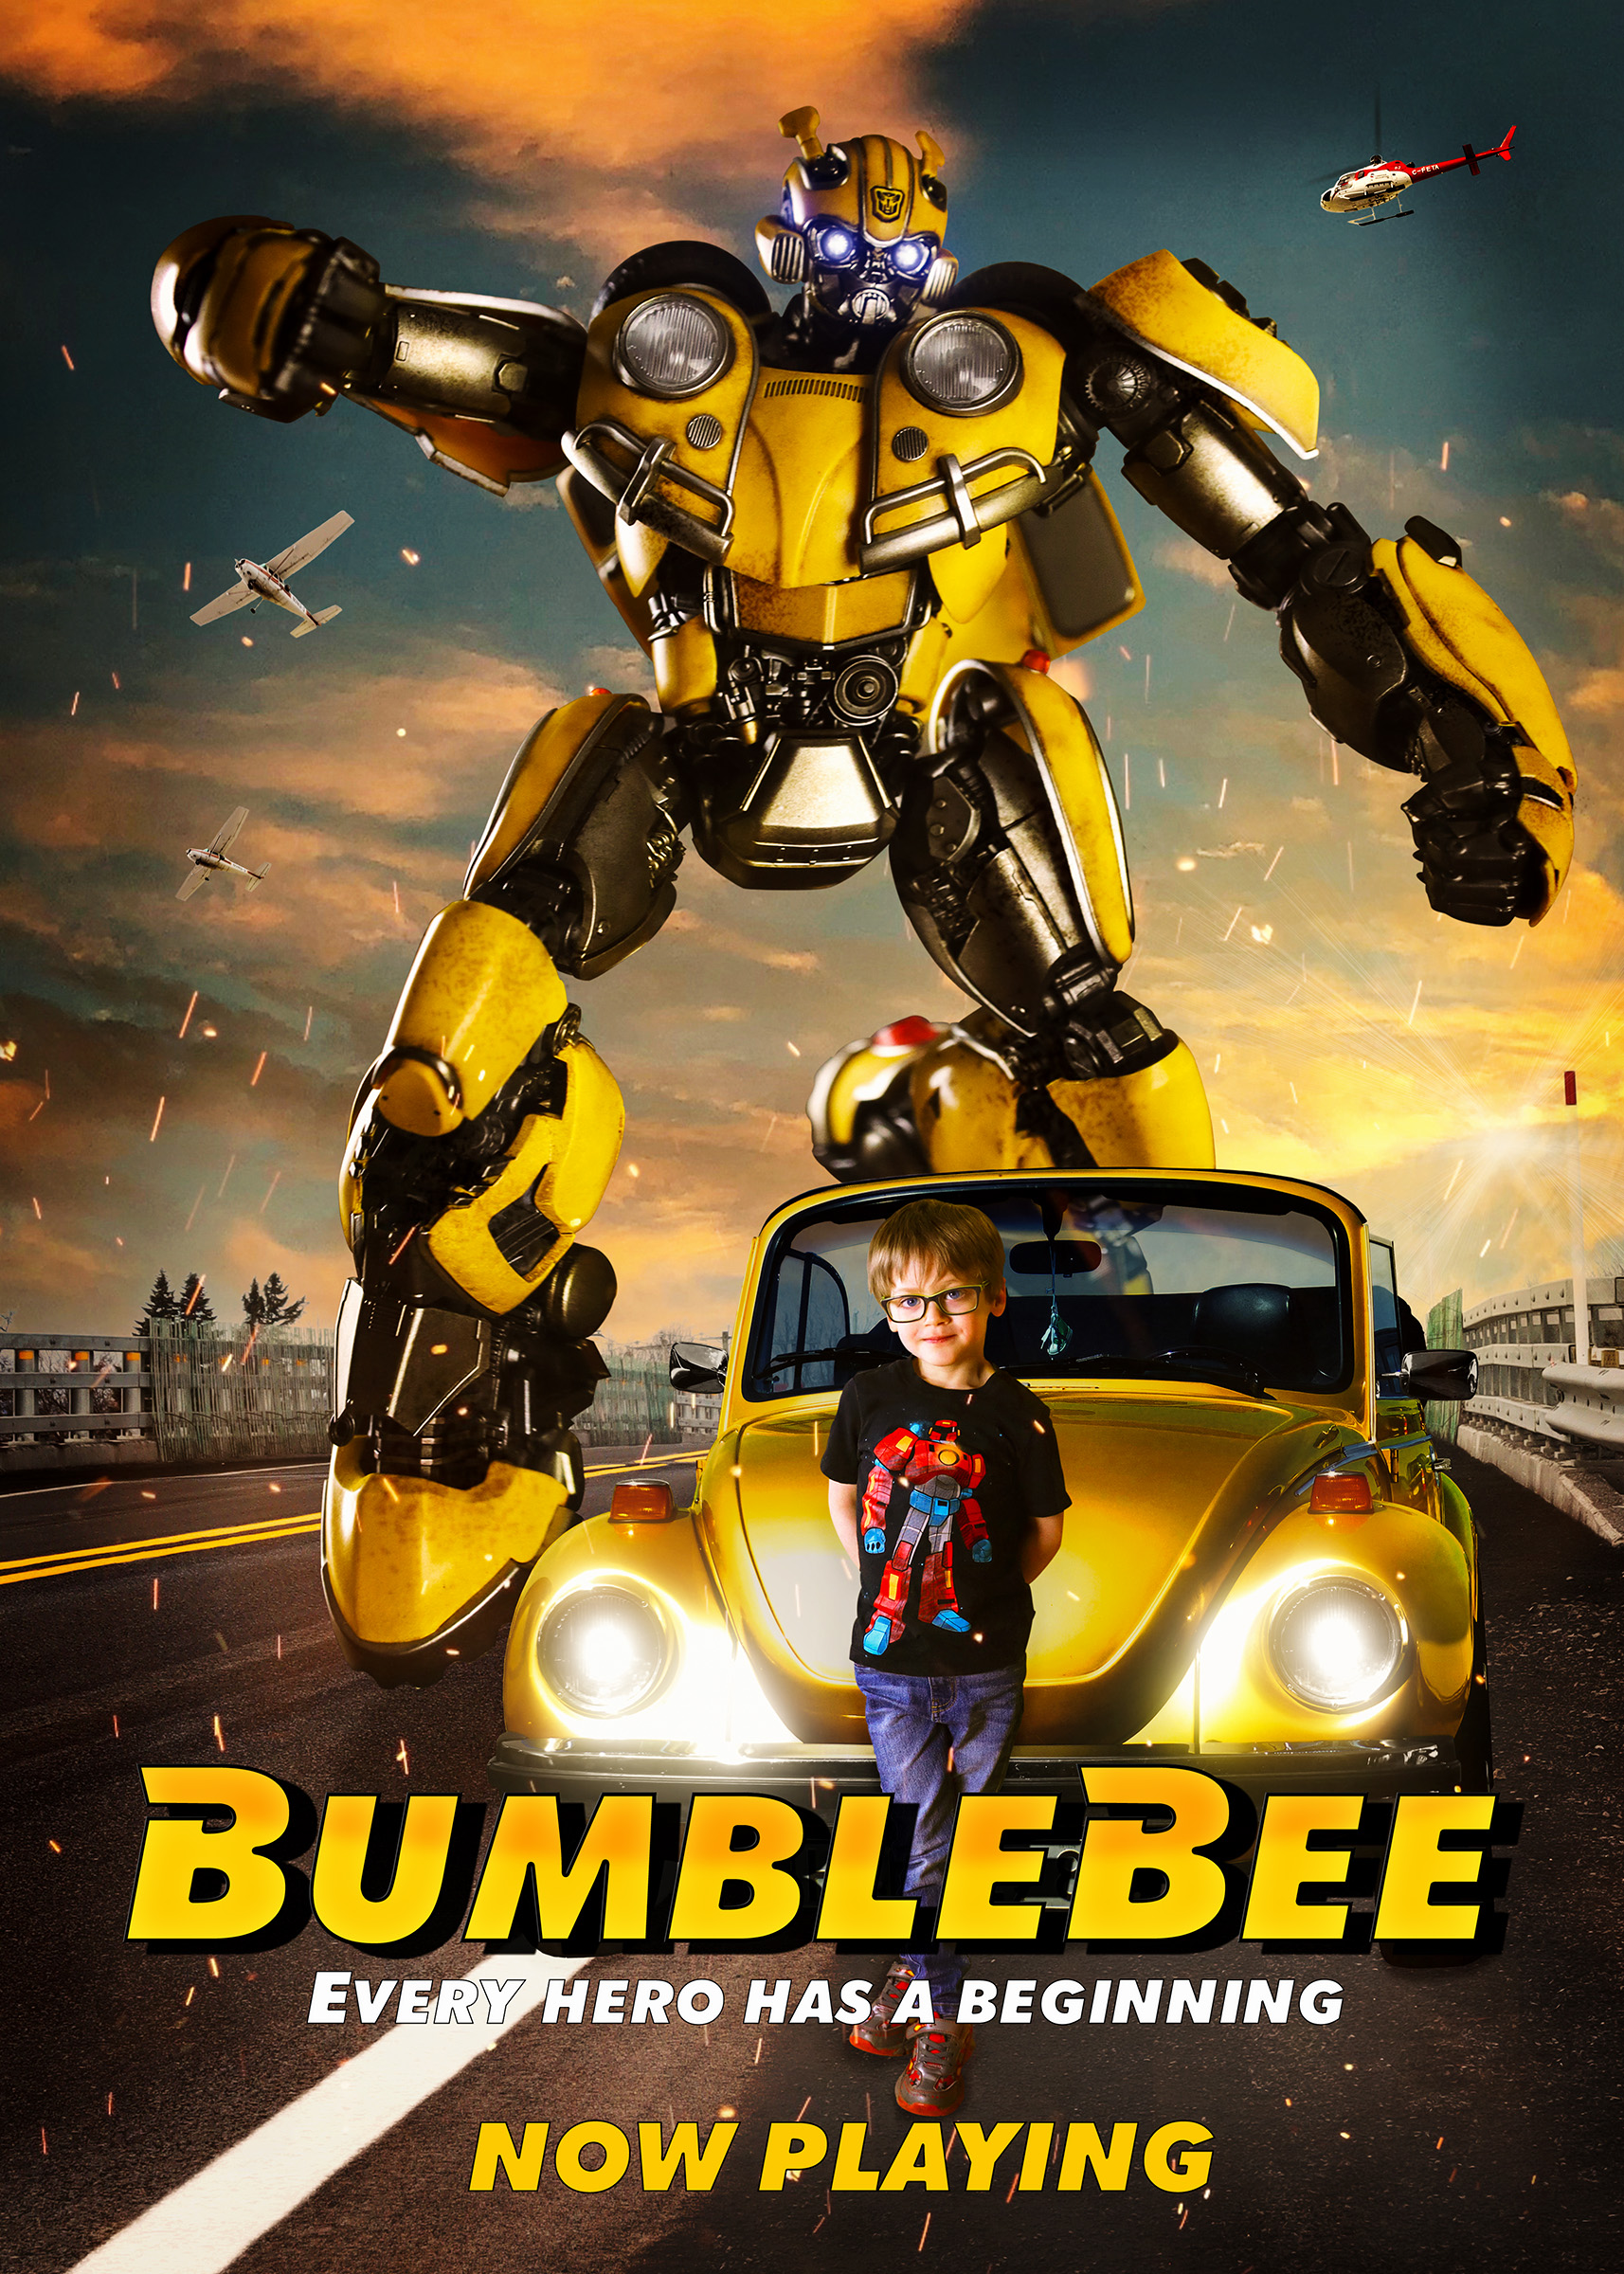 Composite of boy and Tranformers Bumblebee action poses movie poster with old yellow volswagen beetle car, airplanes and a helicopter flying in the sky fire sparks by Vaudreuil-Soulanges and West Island of Montreal photographer Tobi Malette